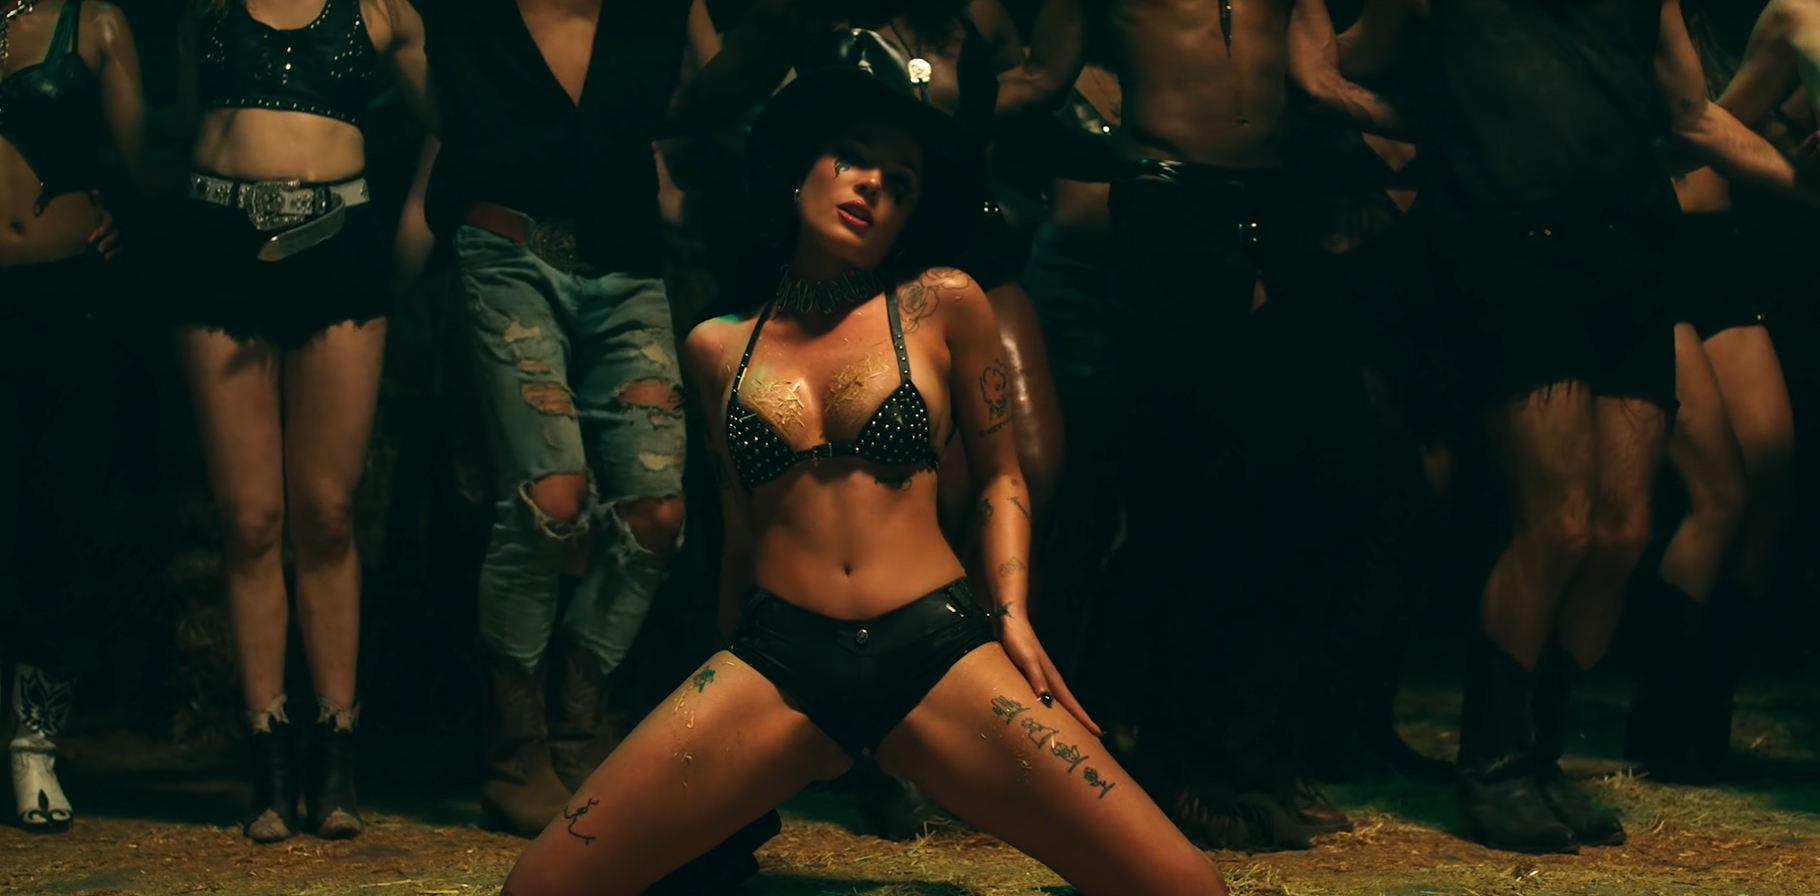 Halsey's "You should be sad" Enters Top 10 On US Spotify Streaming Chart